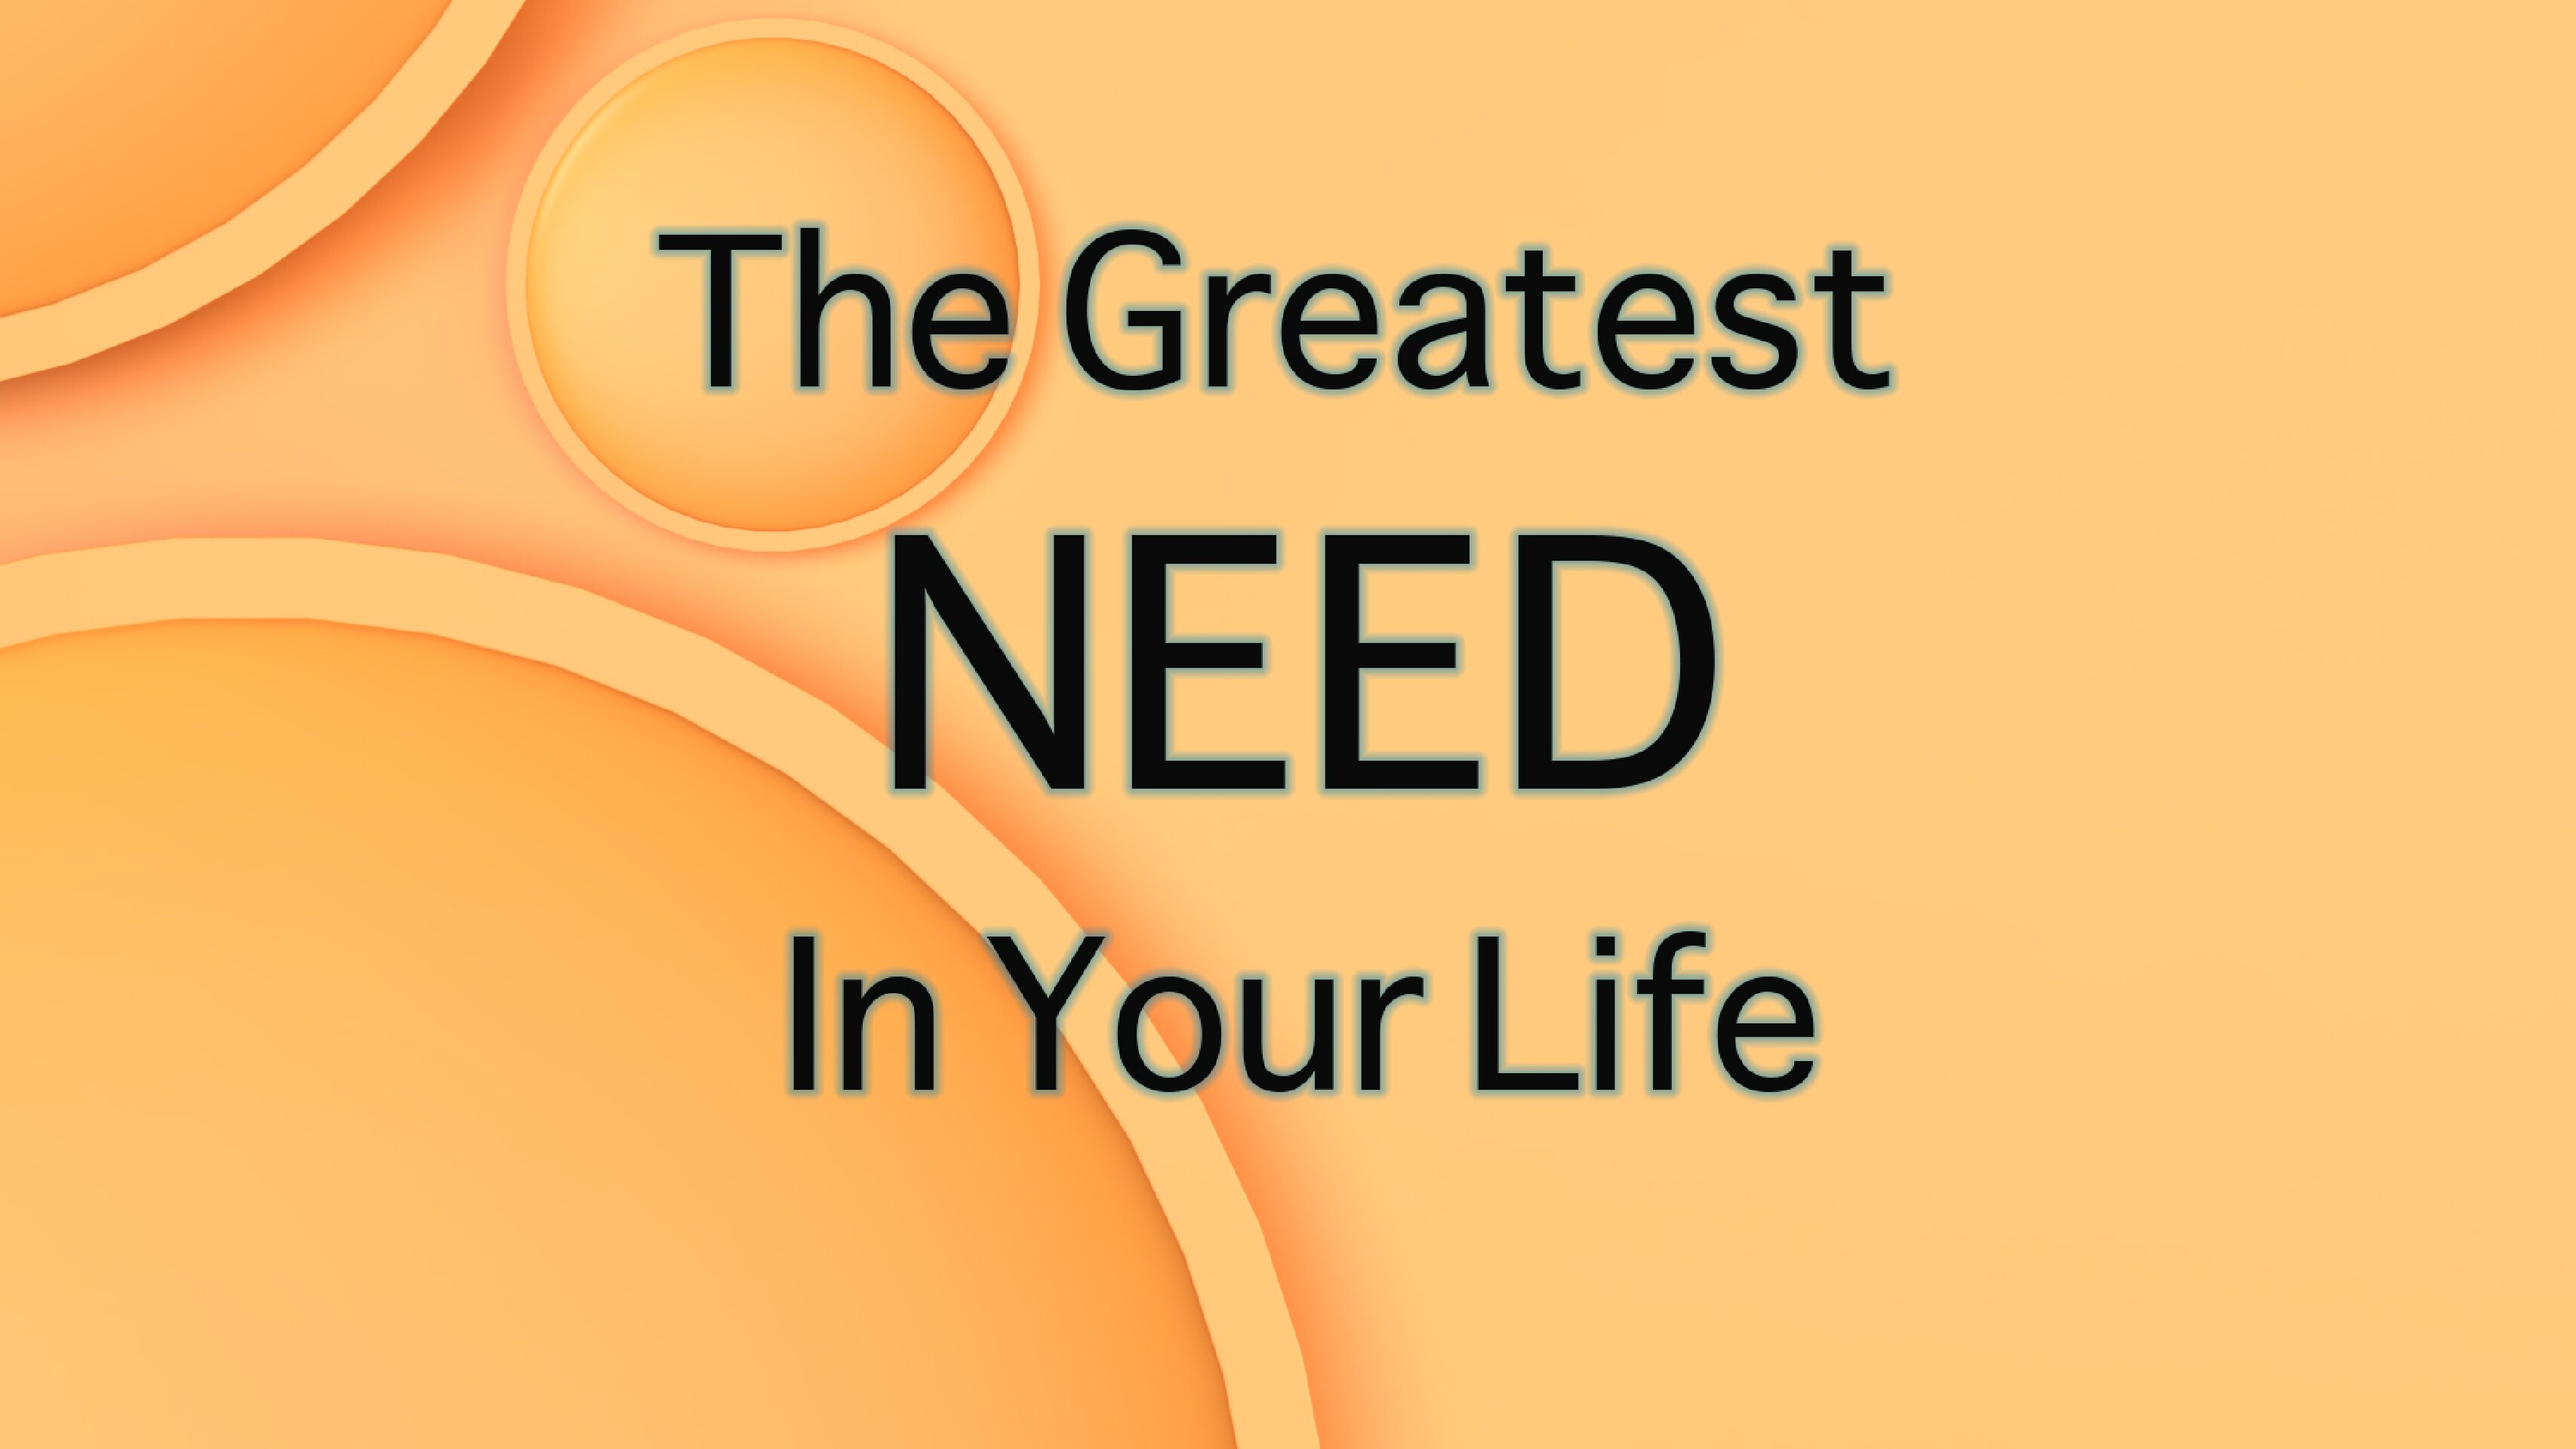 The Greatest Need in Your Life